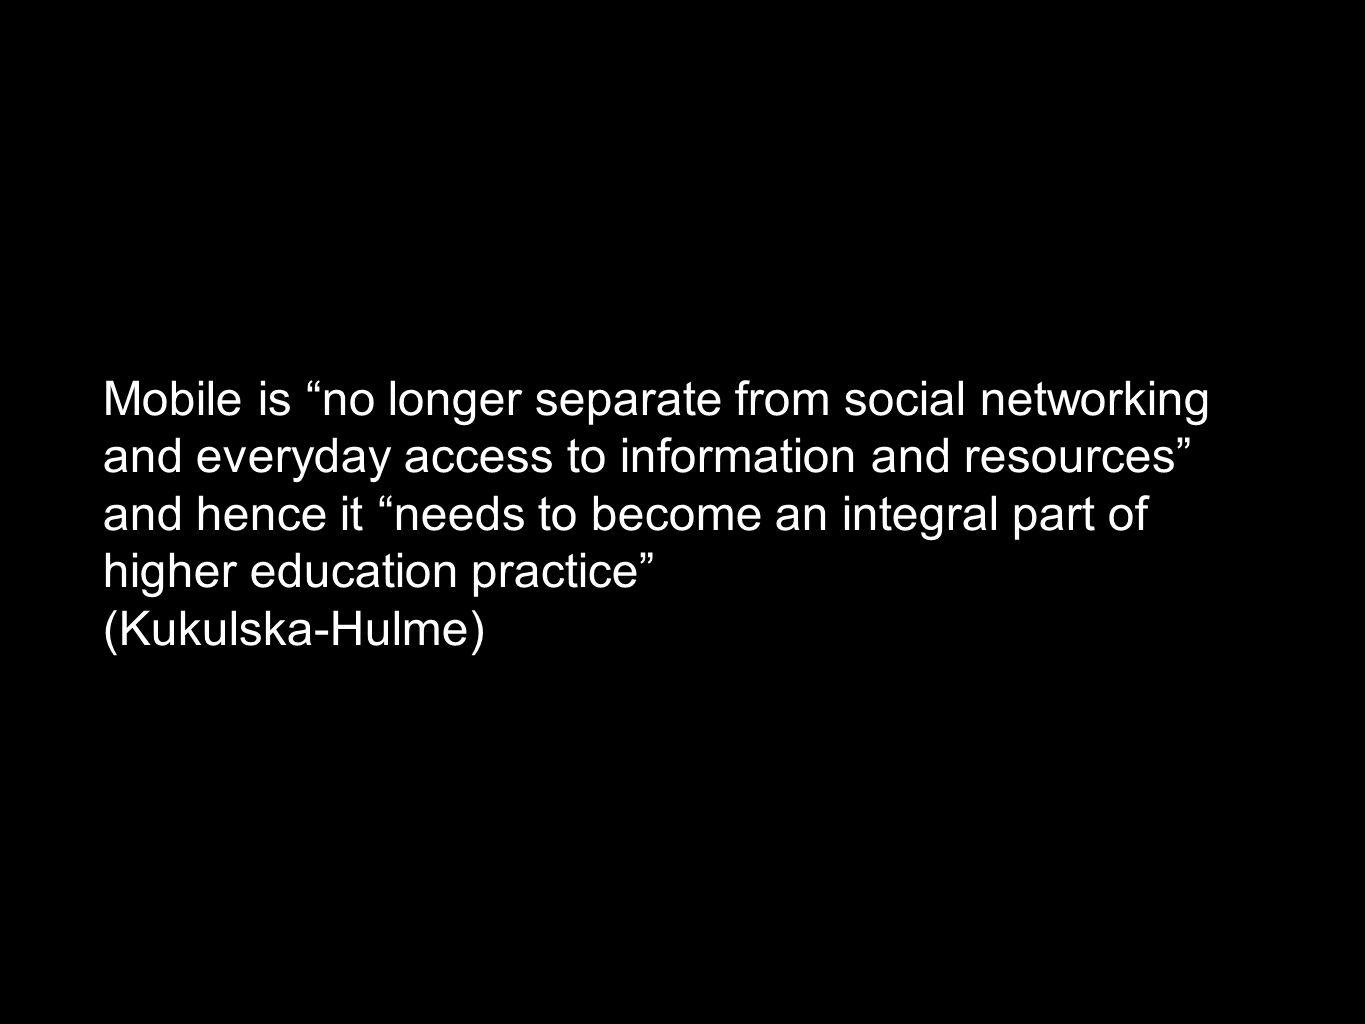 Mobile is no longer separate from social networking and everyday access to information and resources and hence it needs to become an integral part of higher education practice (Kukulska-Hulme)